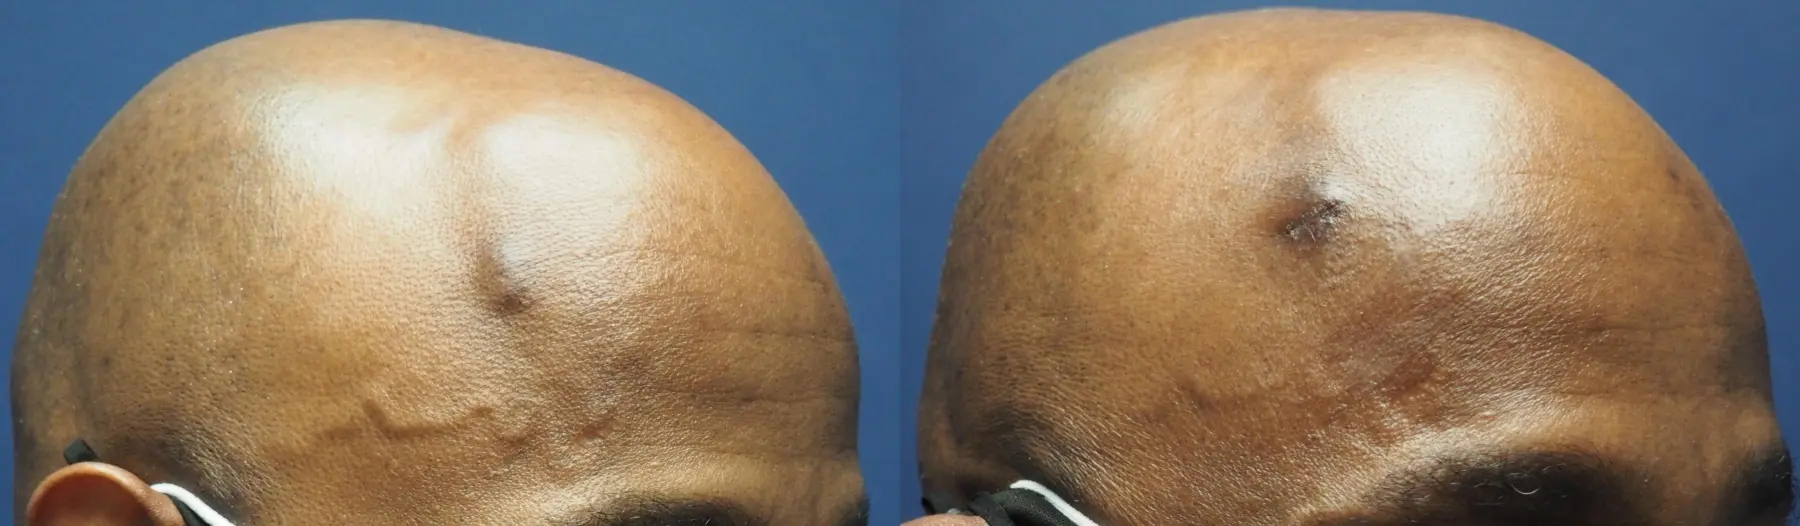 Mole Or Age Spot Removal: Patient 3 - Before and After 1